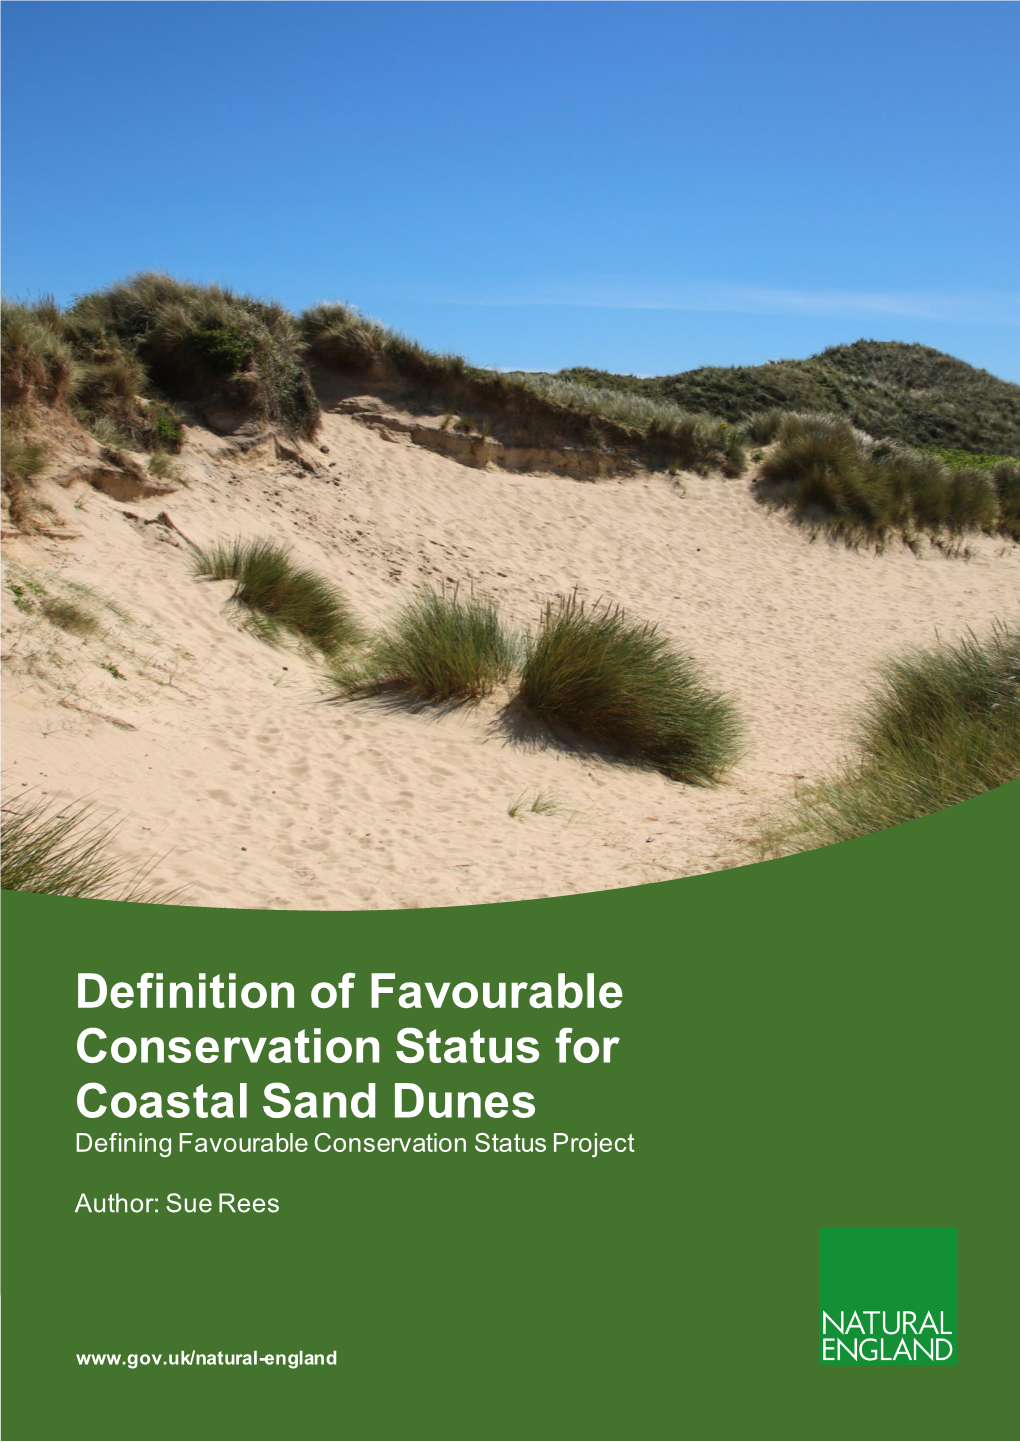 Definition of Favourable Conservation Status for Coastal Sand Dunes